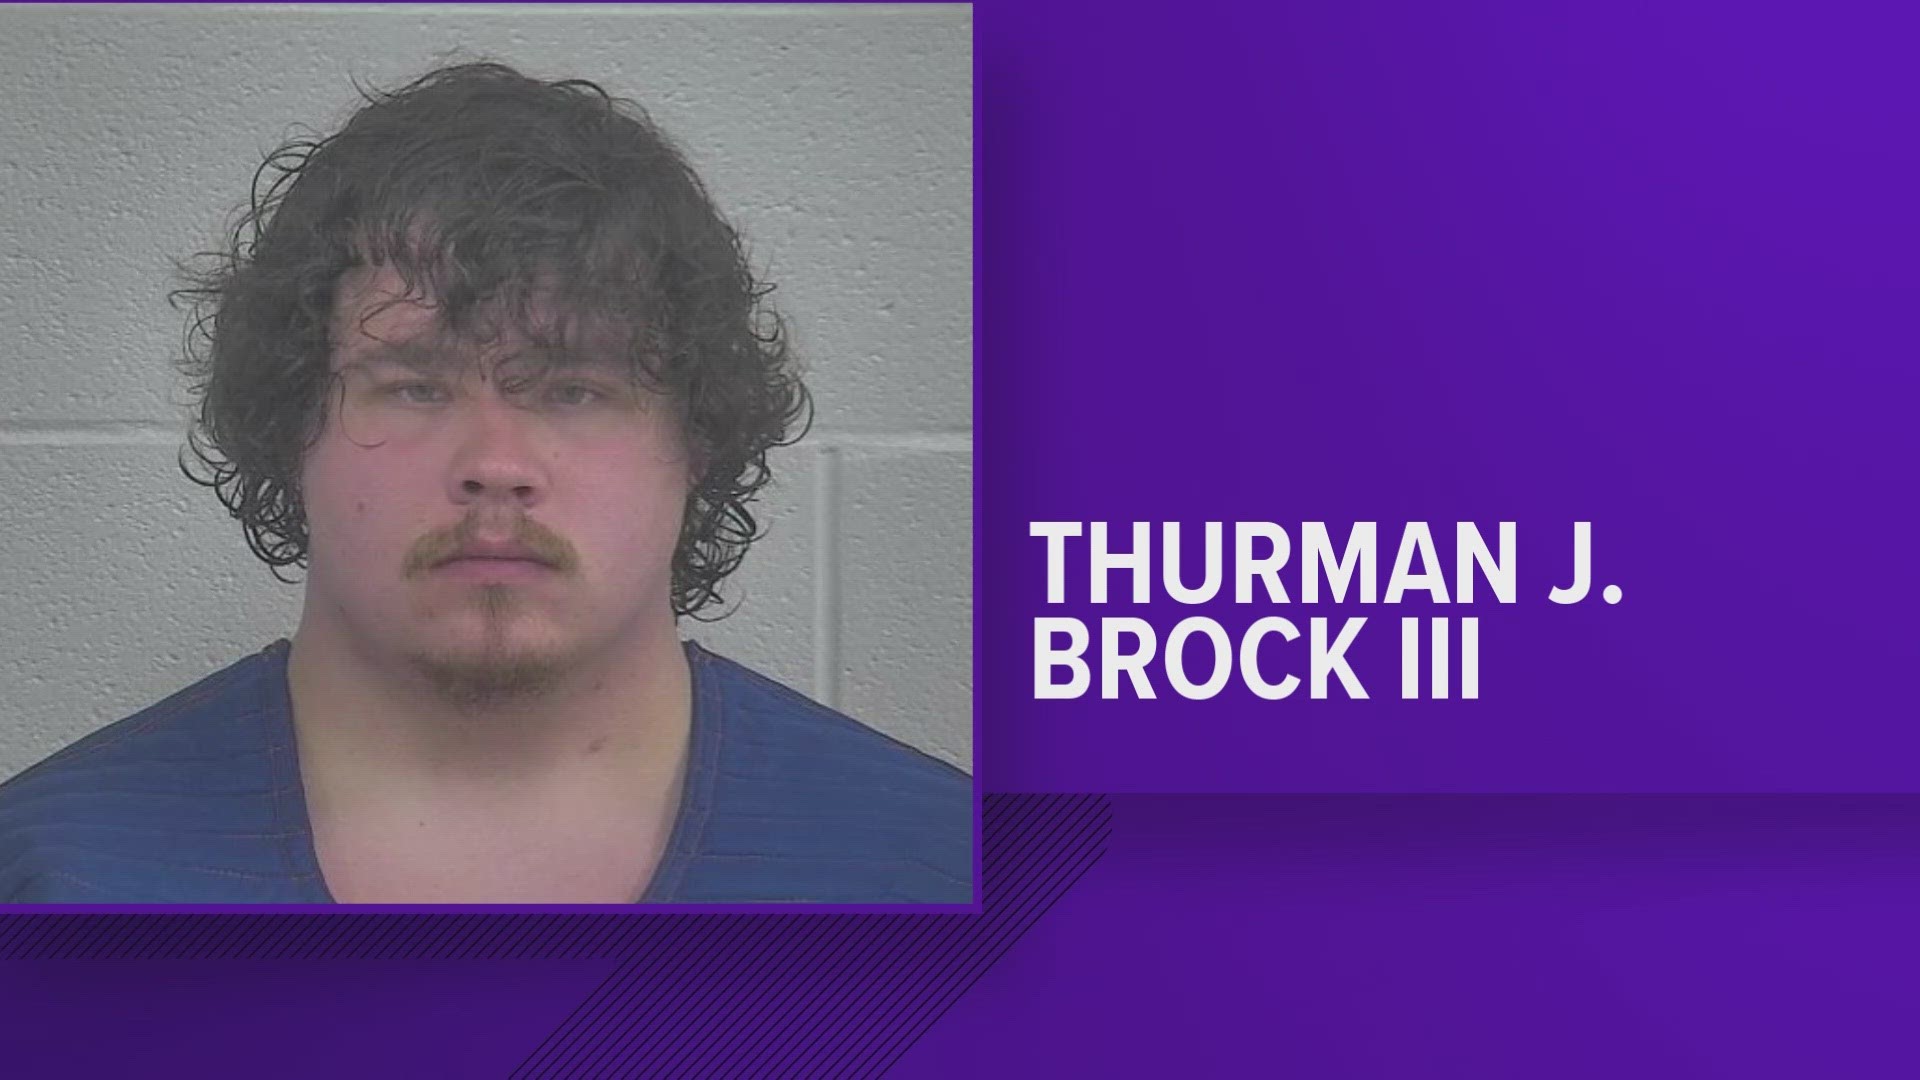 According to the London Police Department, Thurman J. Brock III was arrested Friday afternoon.